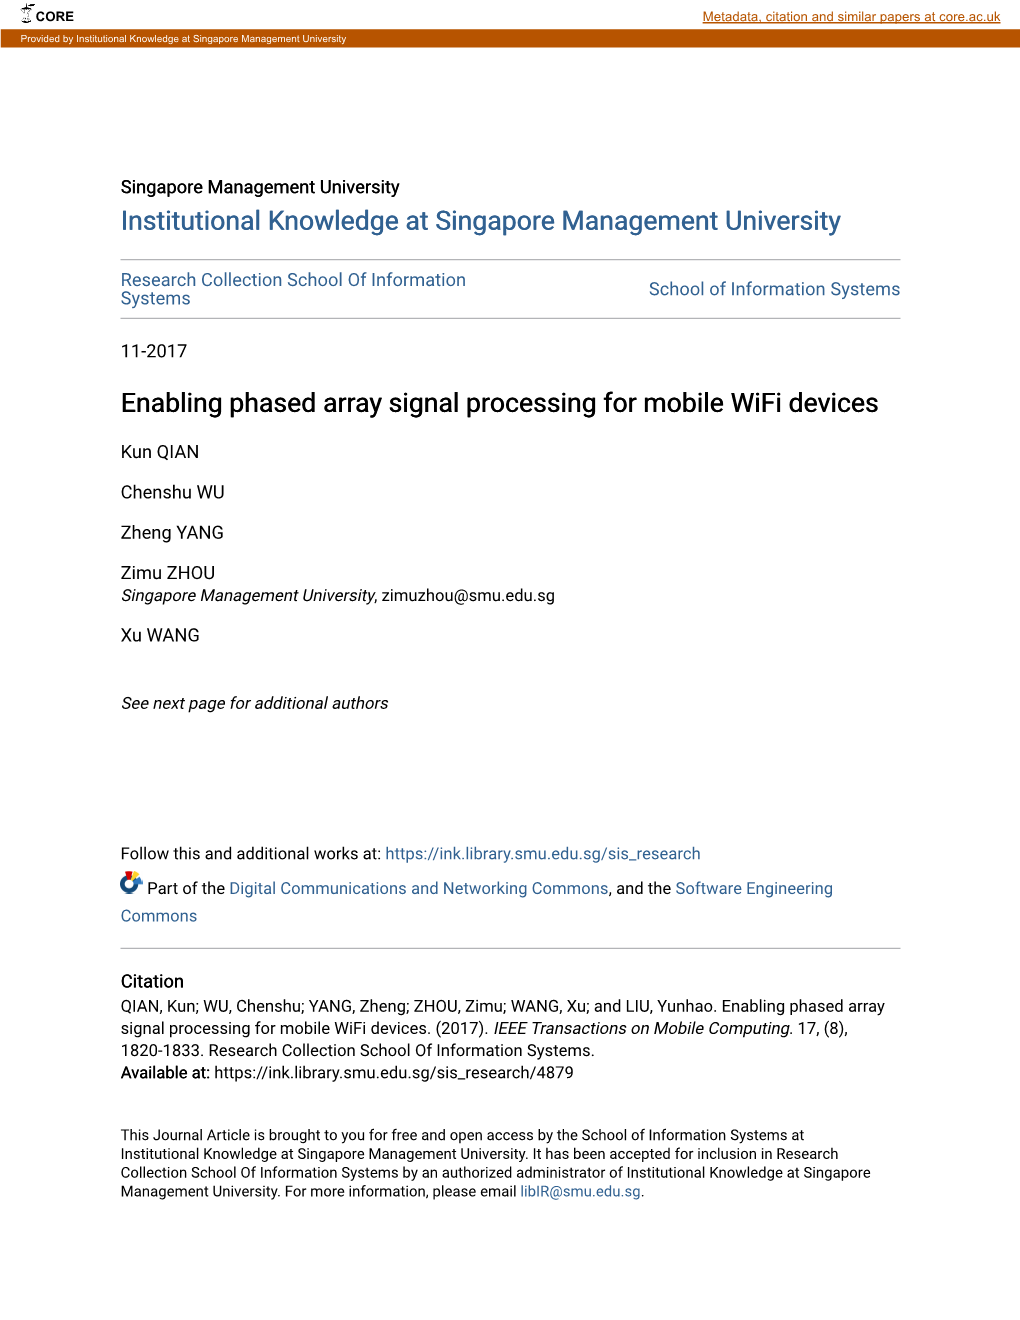 Enabling Phased Array Signal Processing for Mobile Wifi Devices